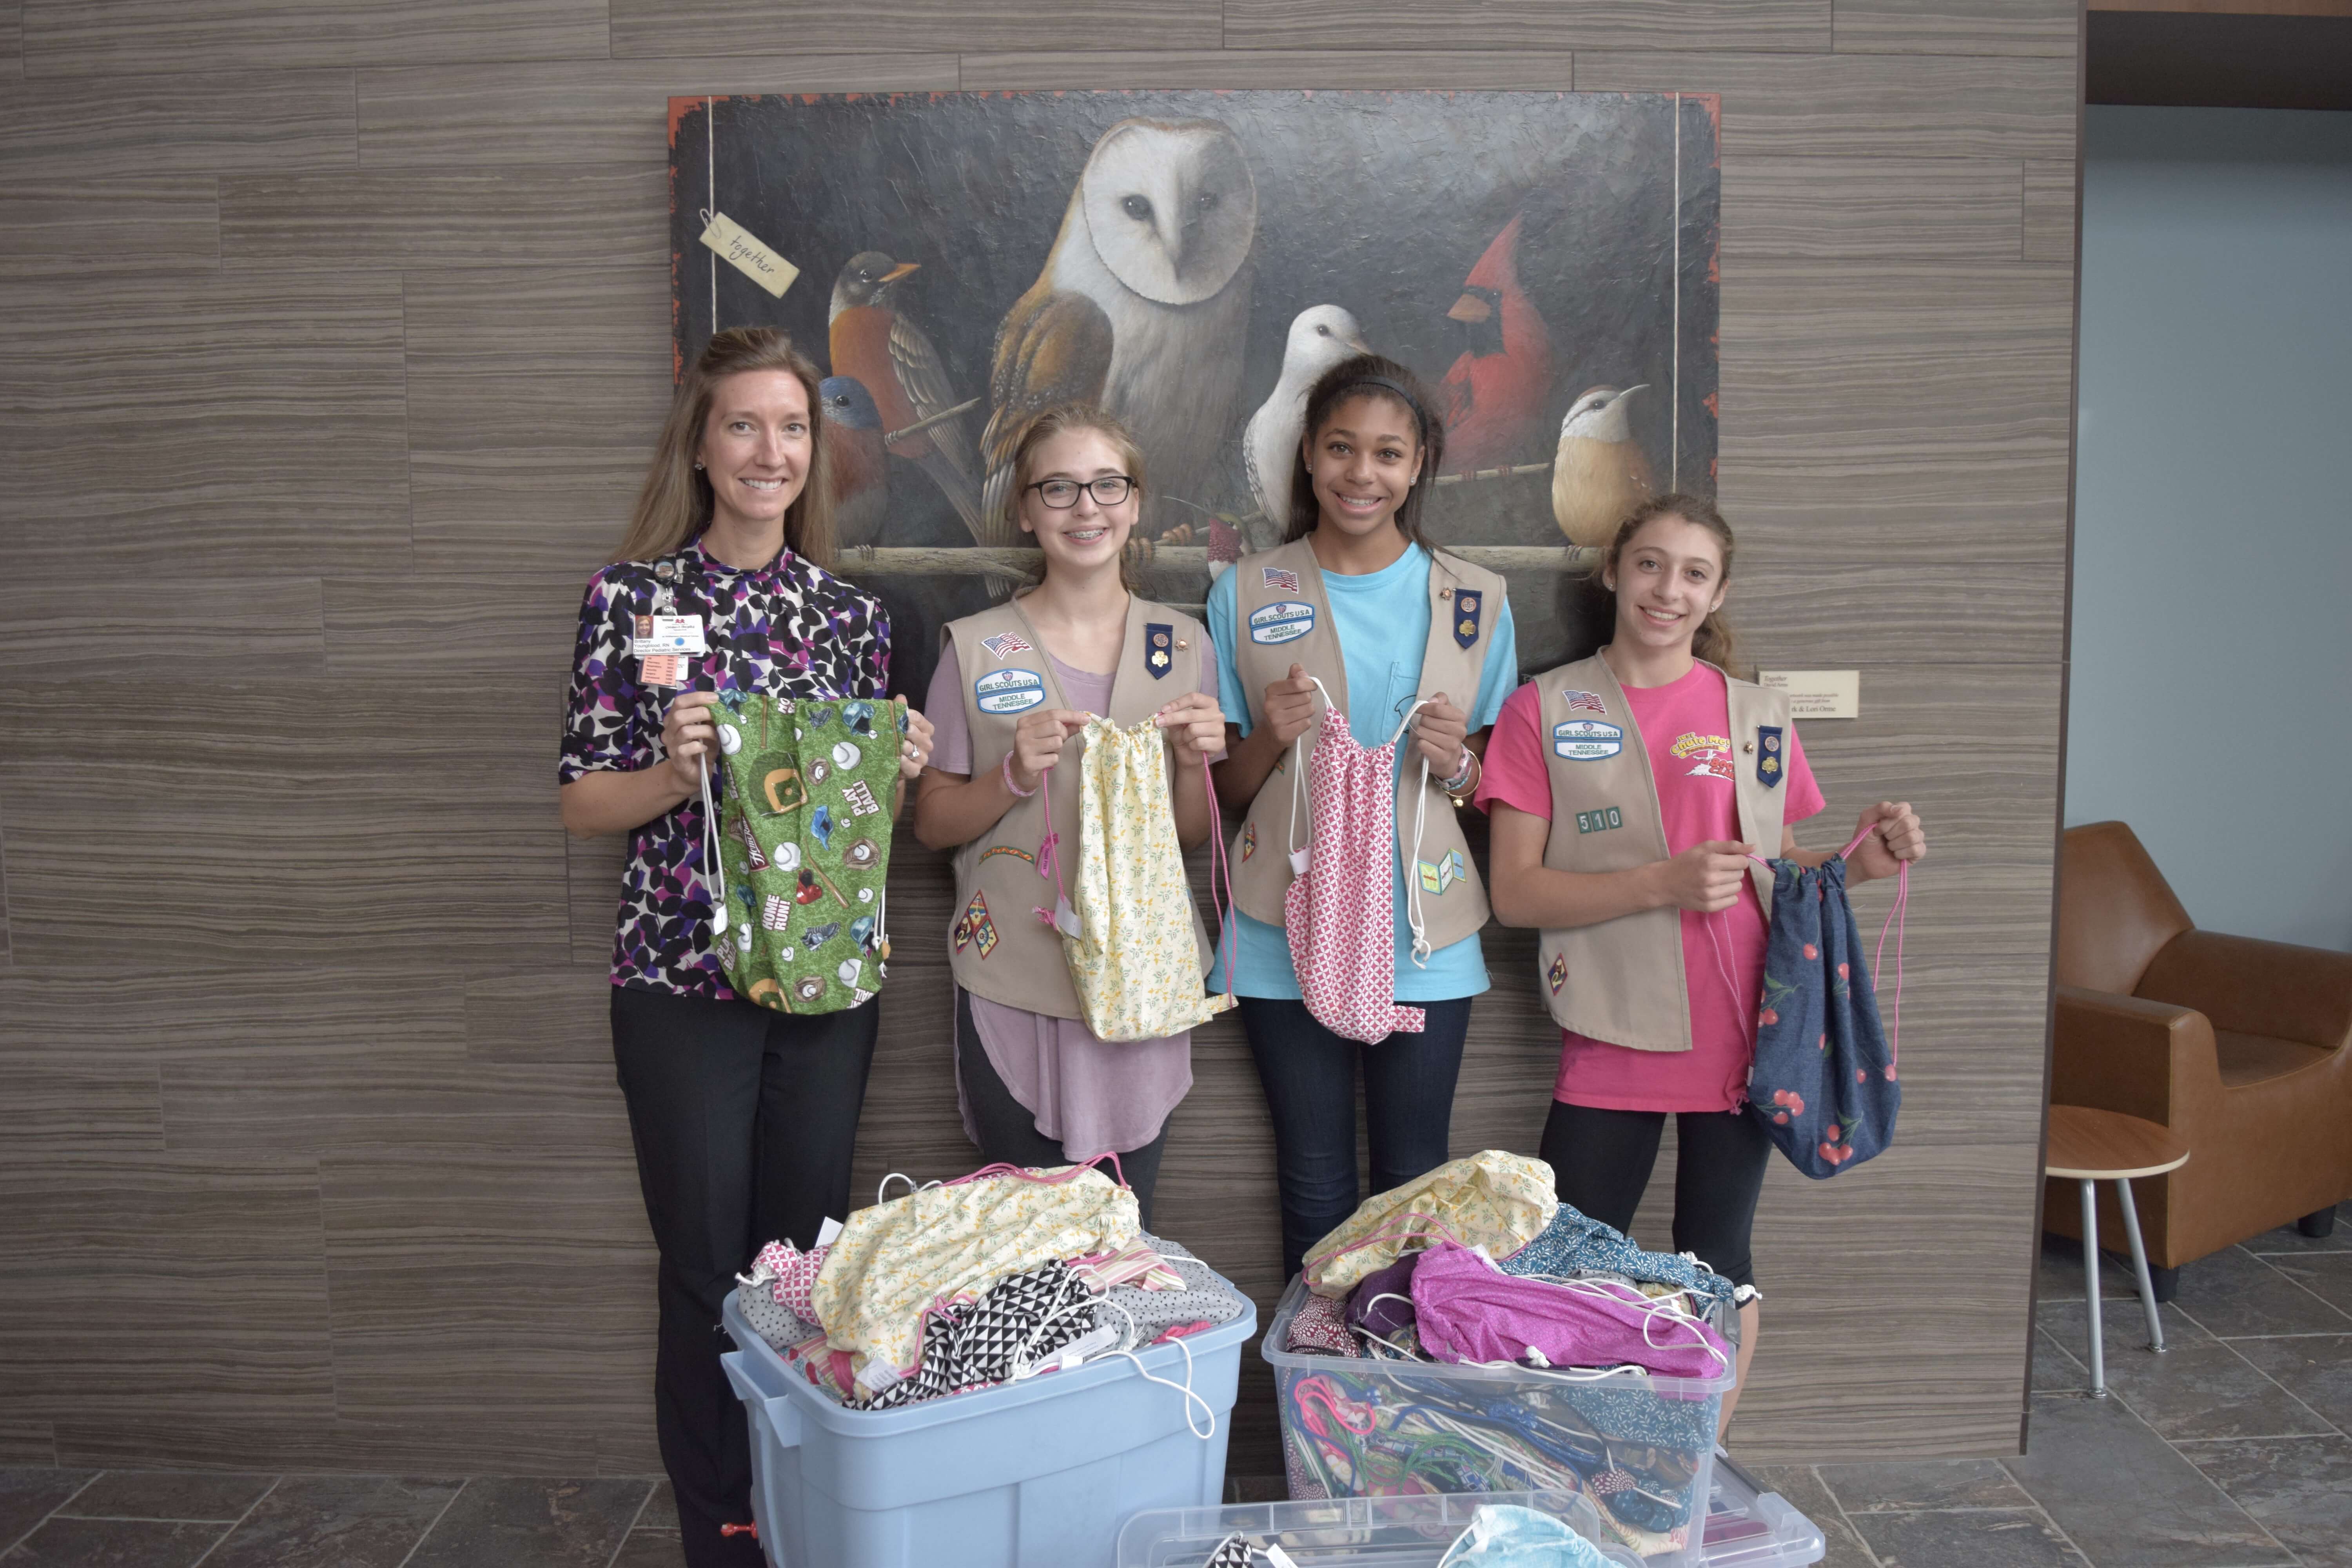 Brittany Youngblood MSN, RN, CEN, CPN, EMT-IV girl scouts scouting bags handmade children's hospital monroe carell jr vanderbilt williamson medical center charity donation donate 50 hours hand sewn